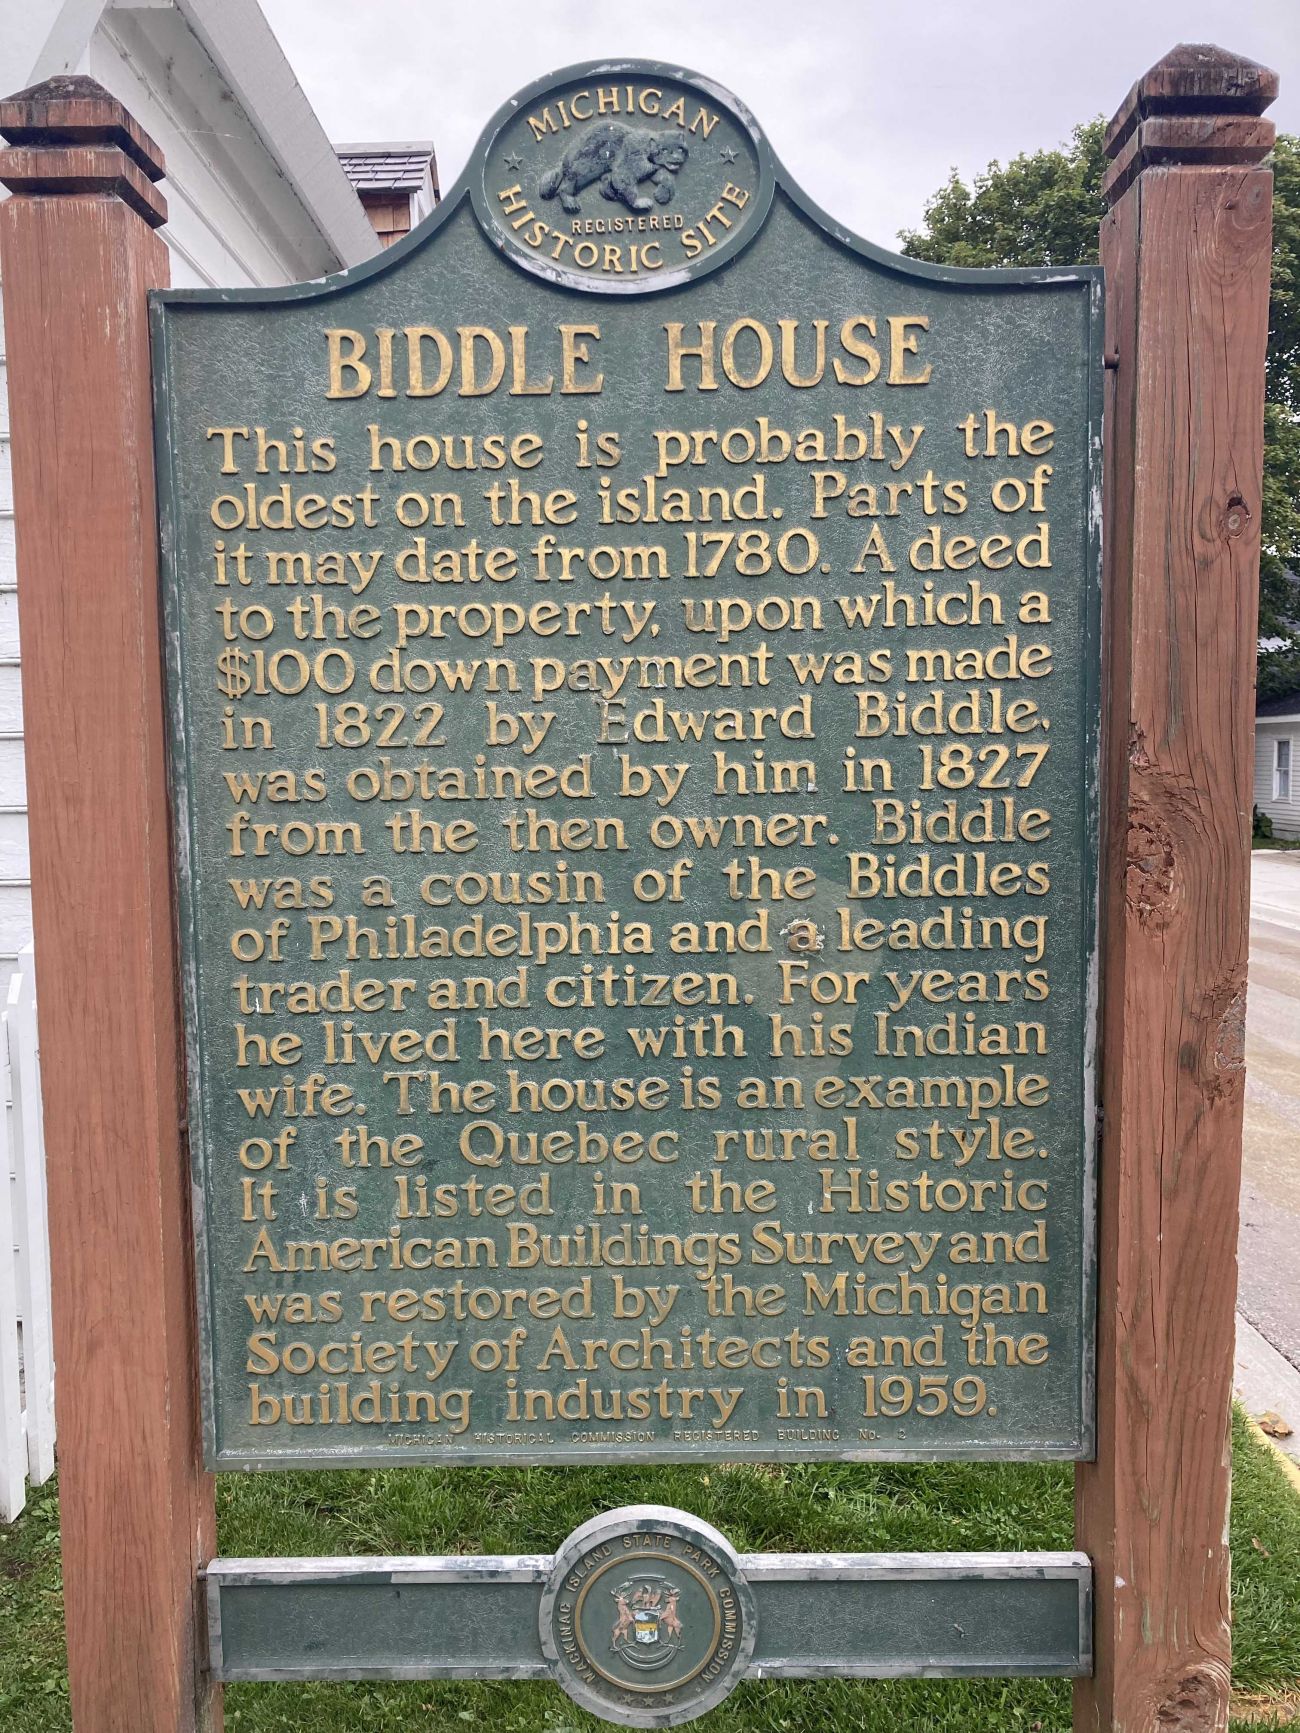 The old historical marker at the Biddle House